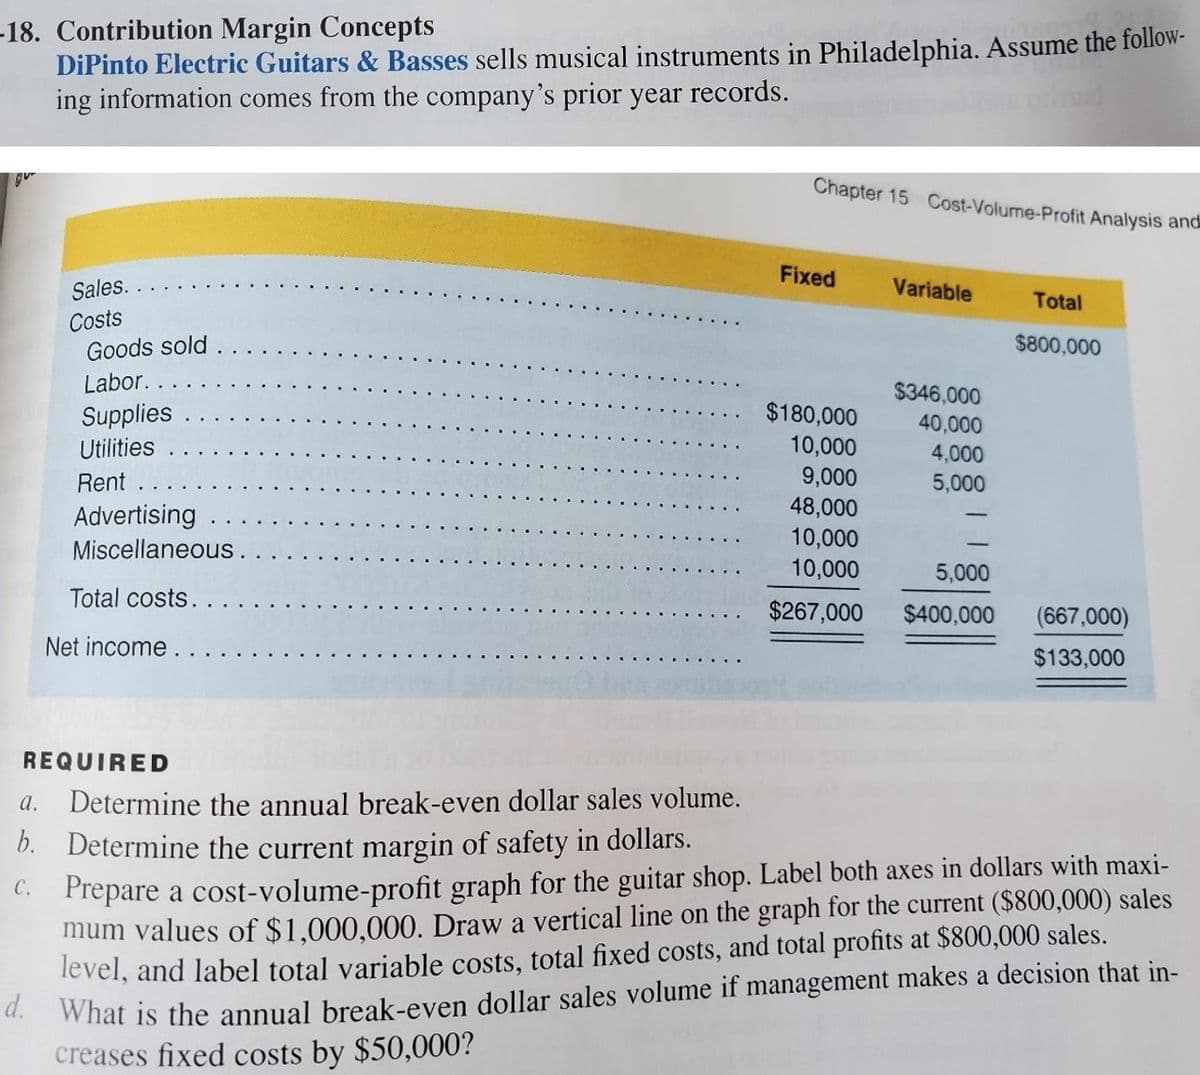 -18. Contribution Margin Concepts
DiPinto Electric Guitars & Basses sells musical instruments in Philadelphia. Assume the follow-
ing information comes from the company's prior year records.
Chapter 15 Cost-Volume-Profit Analysis and
Fixed
Sales.
Variable
Total
Costs
Goods sold.
$800,000
Labor.
$346,000
Supplies
Utilities
$180,000
40,000
10,000
9,000
48,000
4,000
Rent
5,000
Advertising
10,000
10,000
Miscellaneous.
5,000
Total costs.
$267,000
$400,000
(667,000)
Net income.
$133,000
REQUIRED
a.
Determine the annual break-even dollar sales volume.
b. Determine the current margin of safety in dollars.
C. Prepare a cost-volume-profit graph for the guitar shop. Label both axes in dollars with maxi-
mum values of $1,000,000. Draw a vertical line on the graph for the current ($800,000) sales
level, and label total variable costs, total fixed costs, and total profits at $800,000 sales.
". What is the annual break-even dollar sales volume if management makes a decision that in-
creases fixed costs by $50,000?
